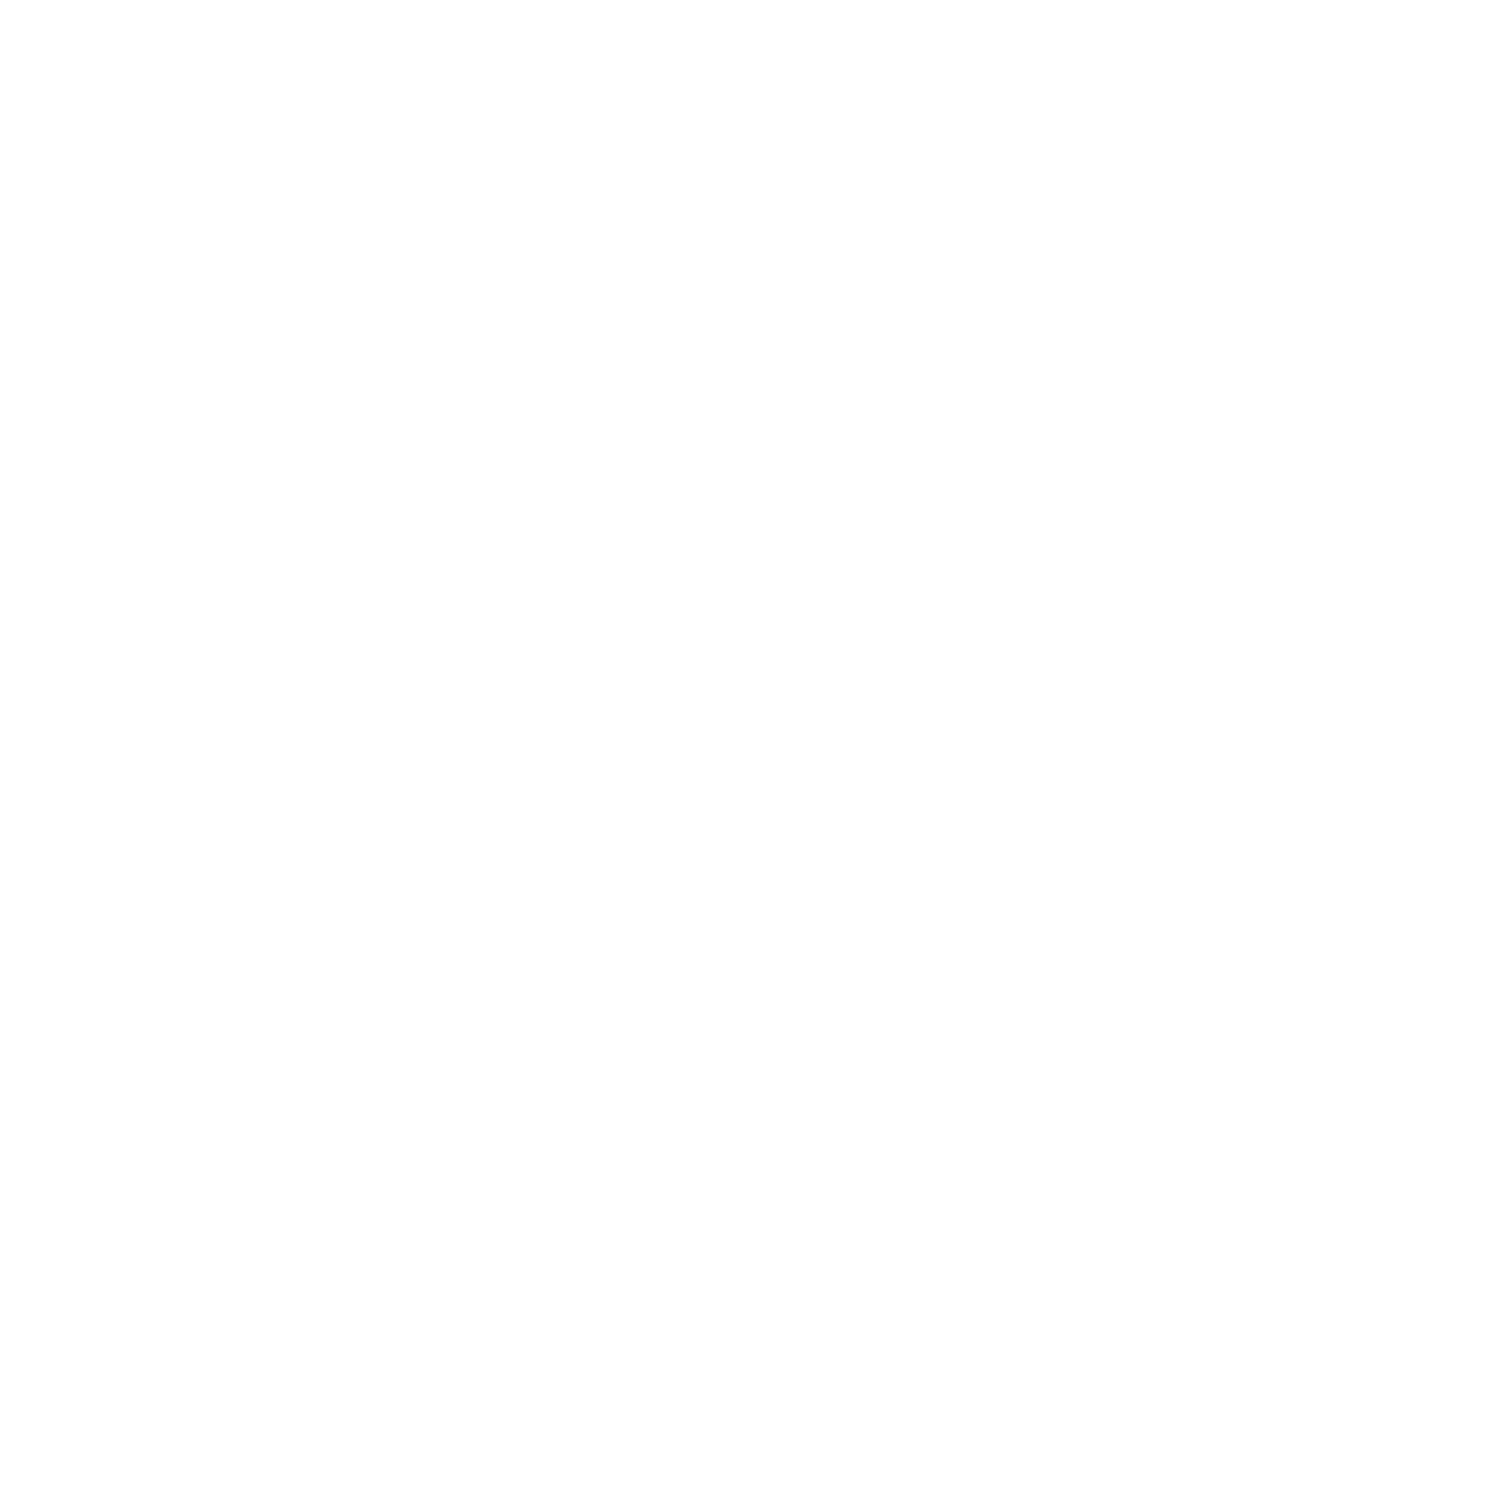 The Alcyon Center